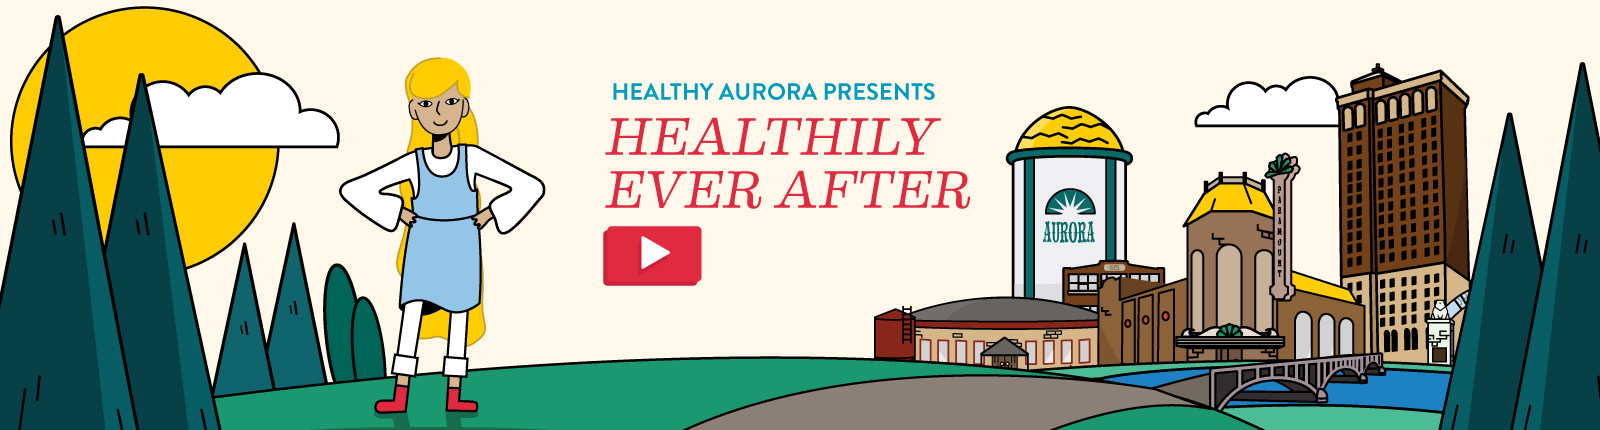 Healthy Aurora Presents Healthily Ever After